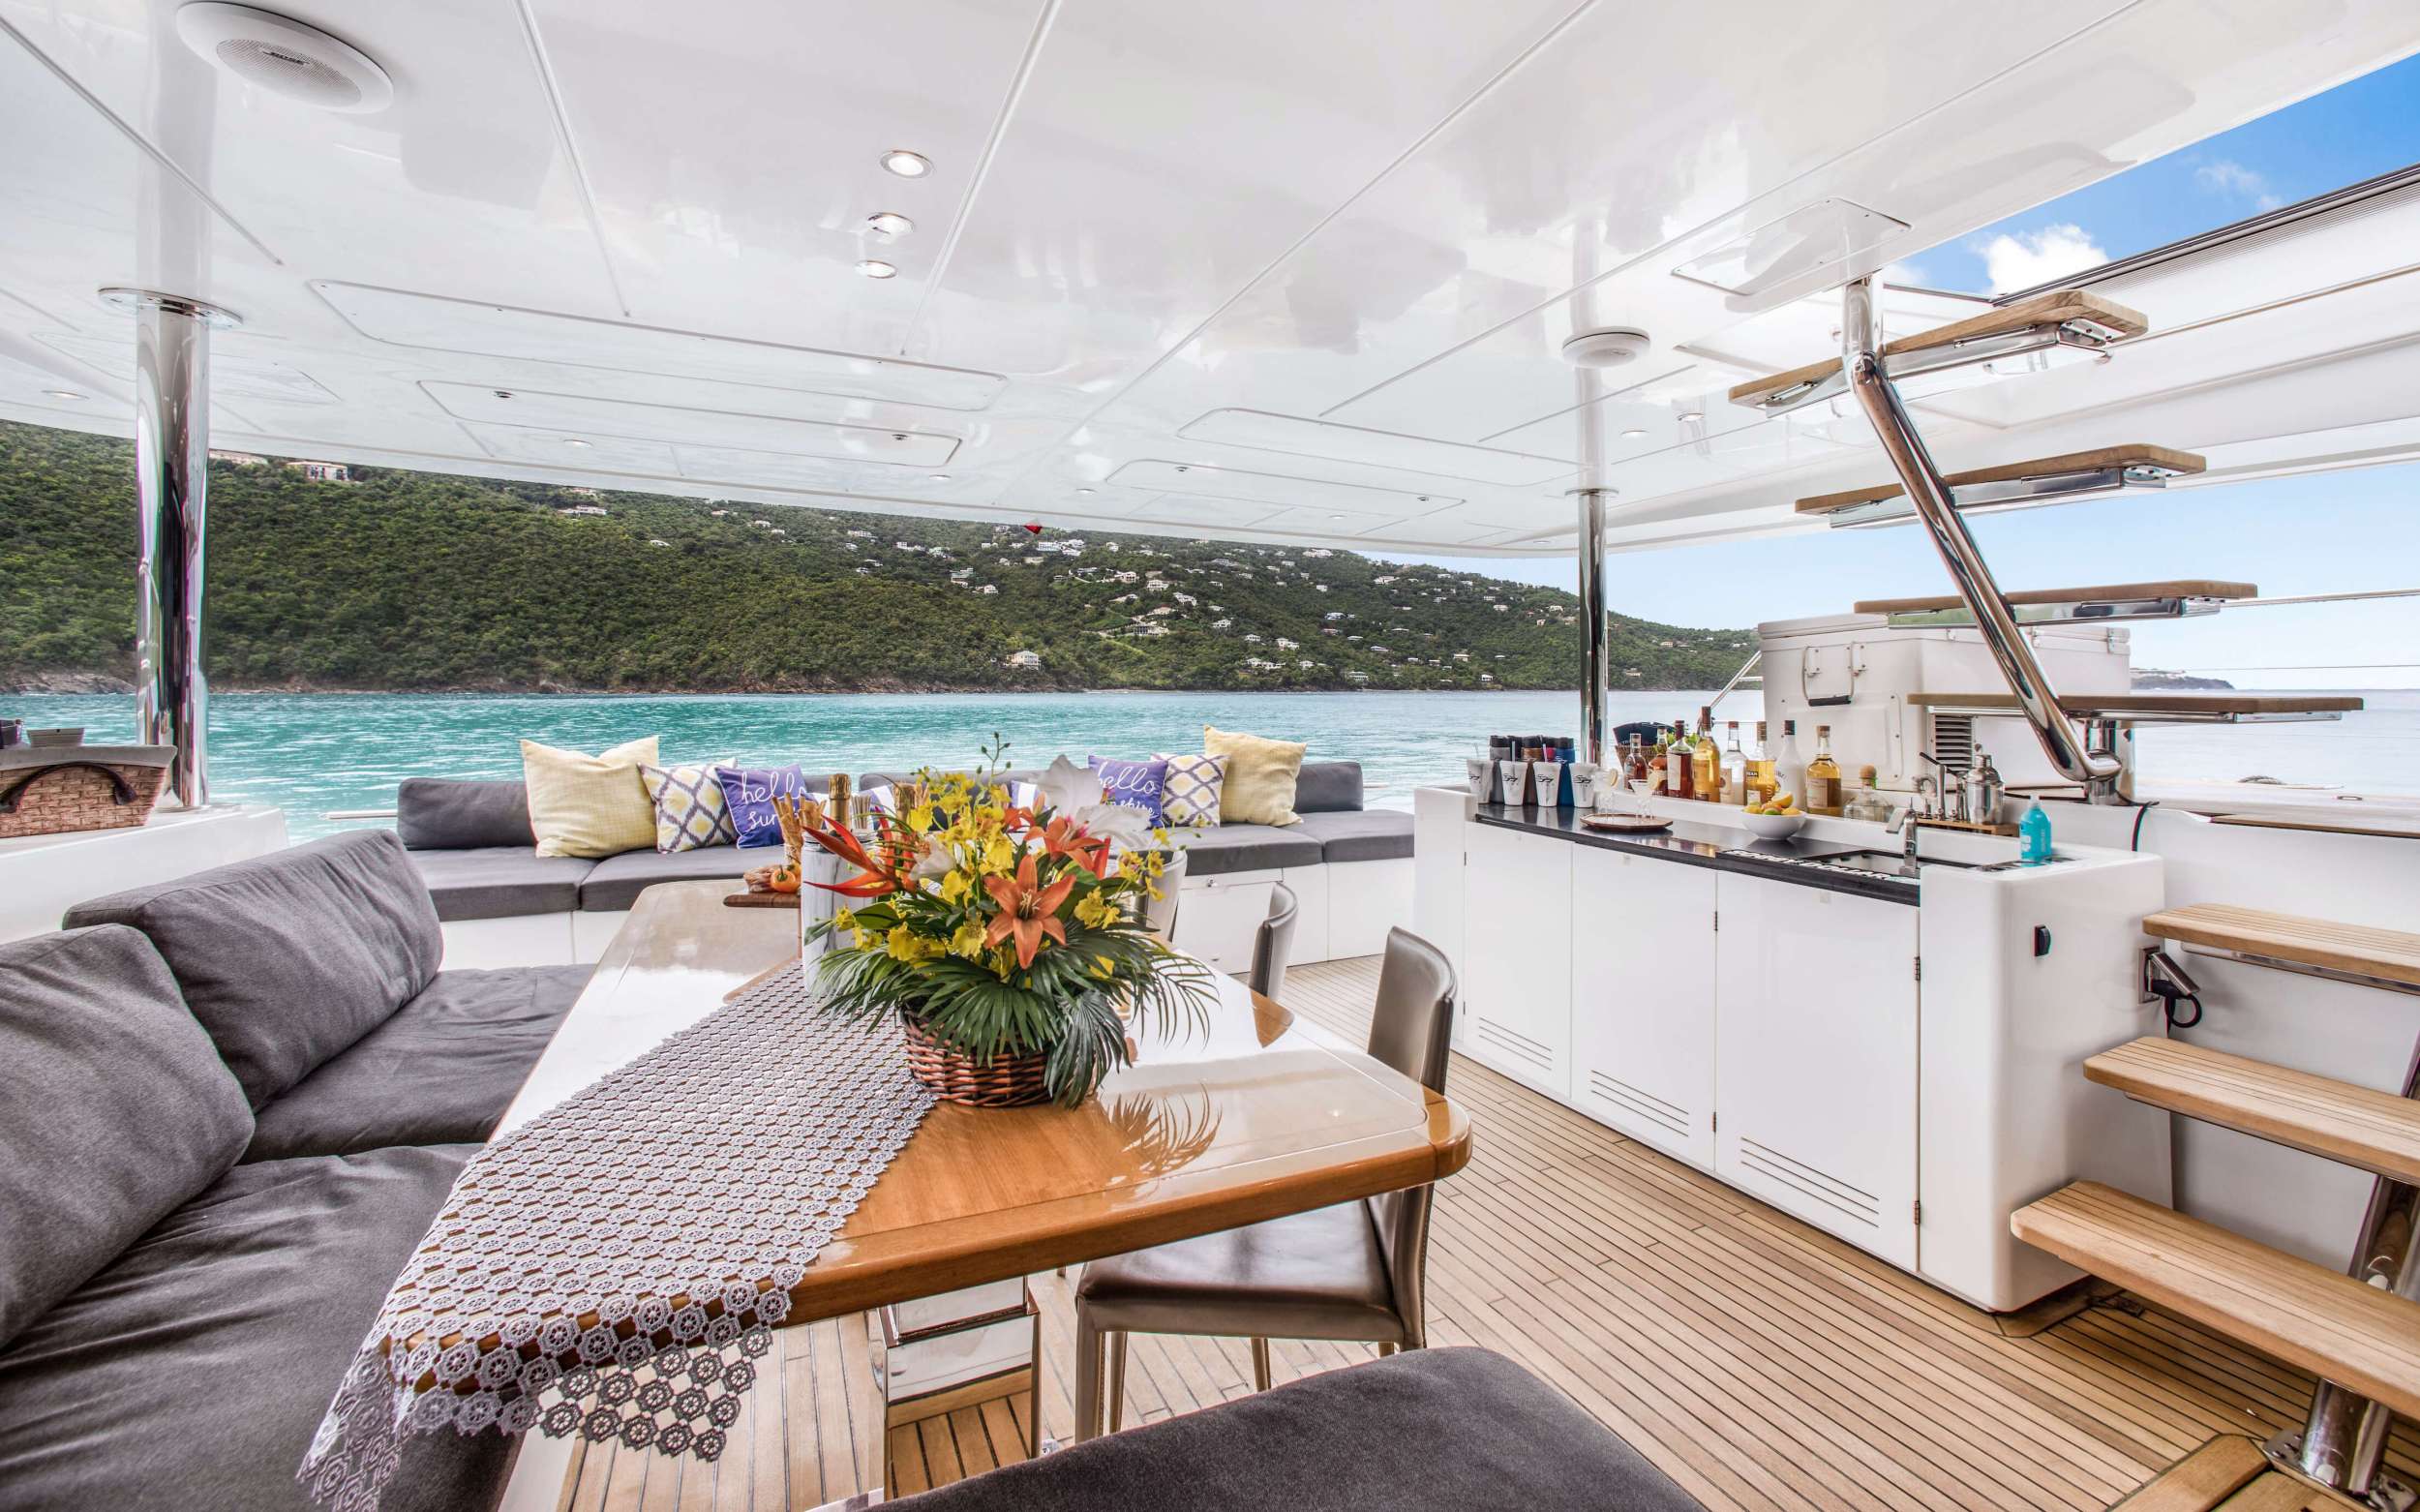 ULTRA Yacht Charter - The dining area